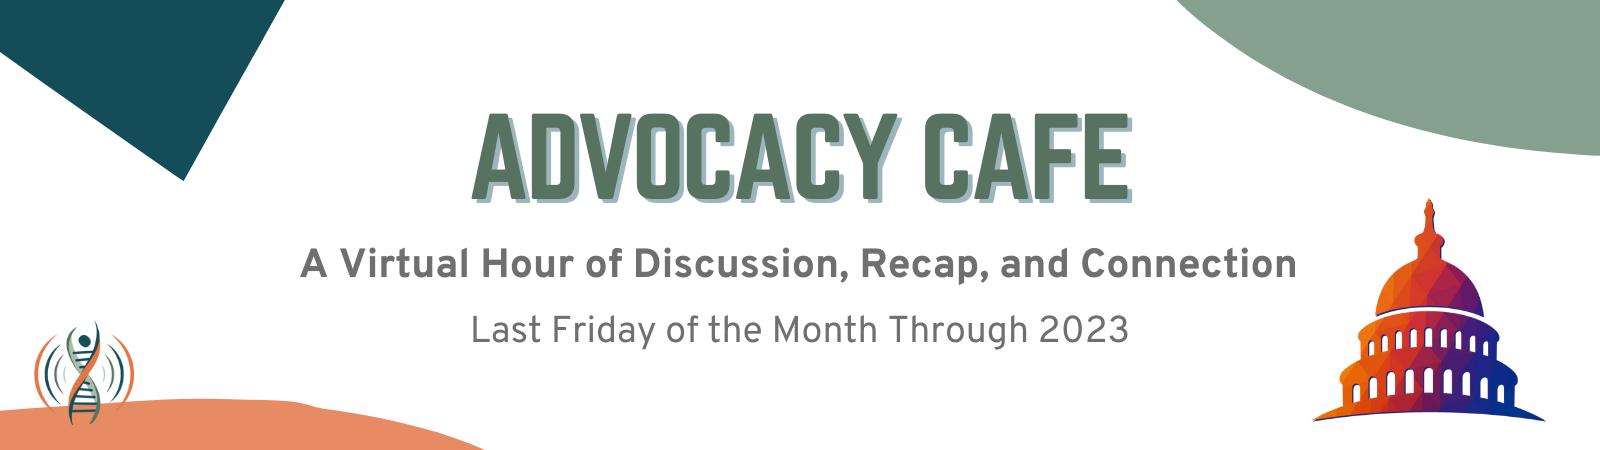 Advocacy Cafe Chat Graphic 2023 Last Friday of the Month Through 2023